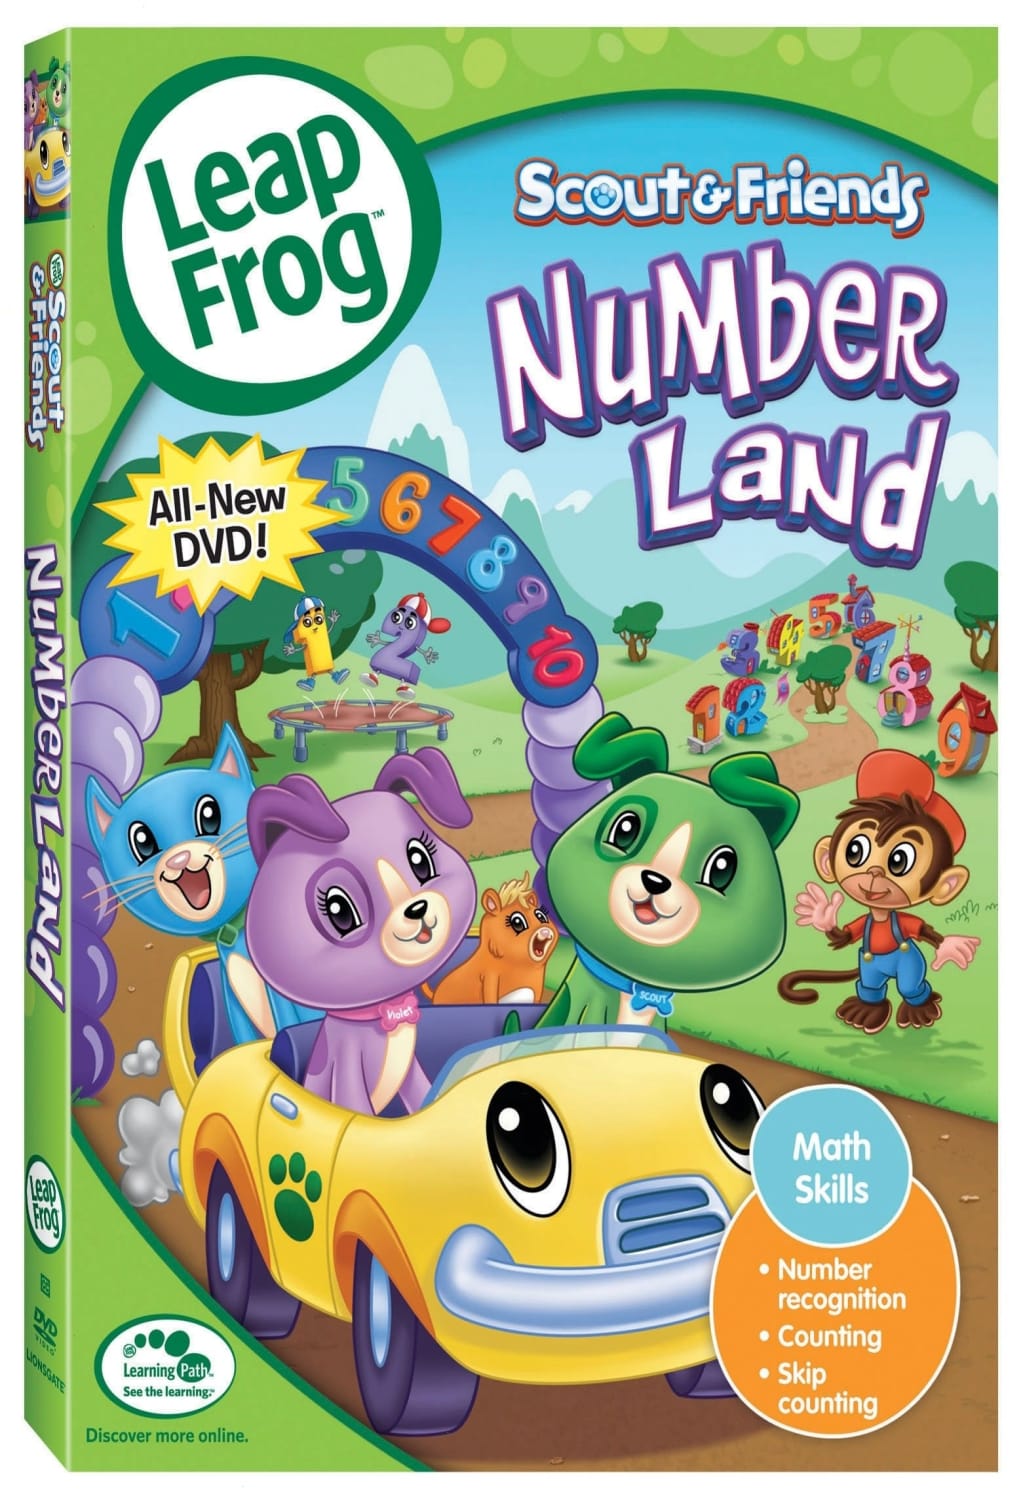 Leap Frog: Scout & Friends: Number Land (DVD)